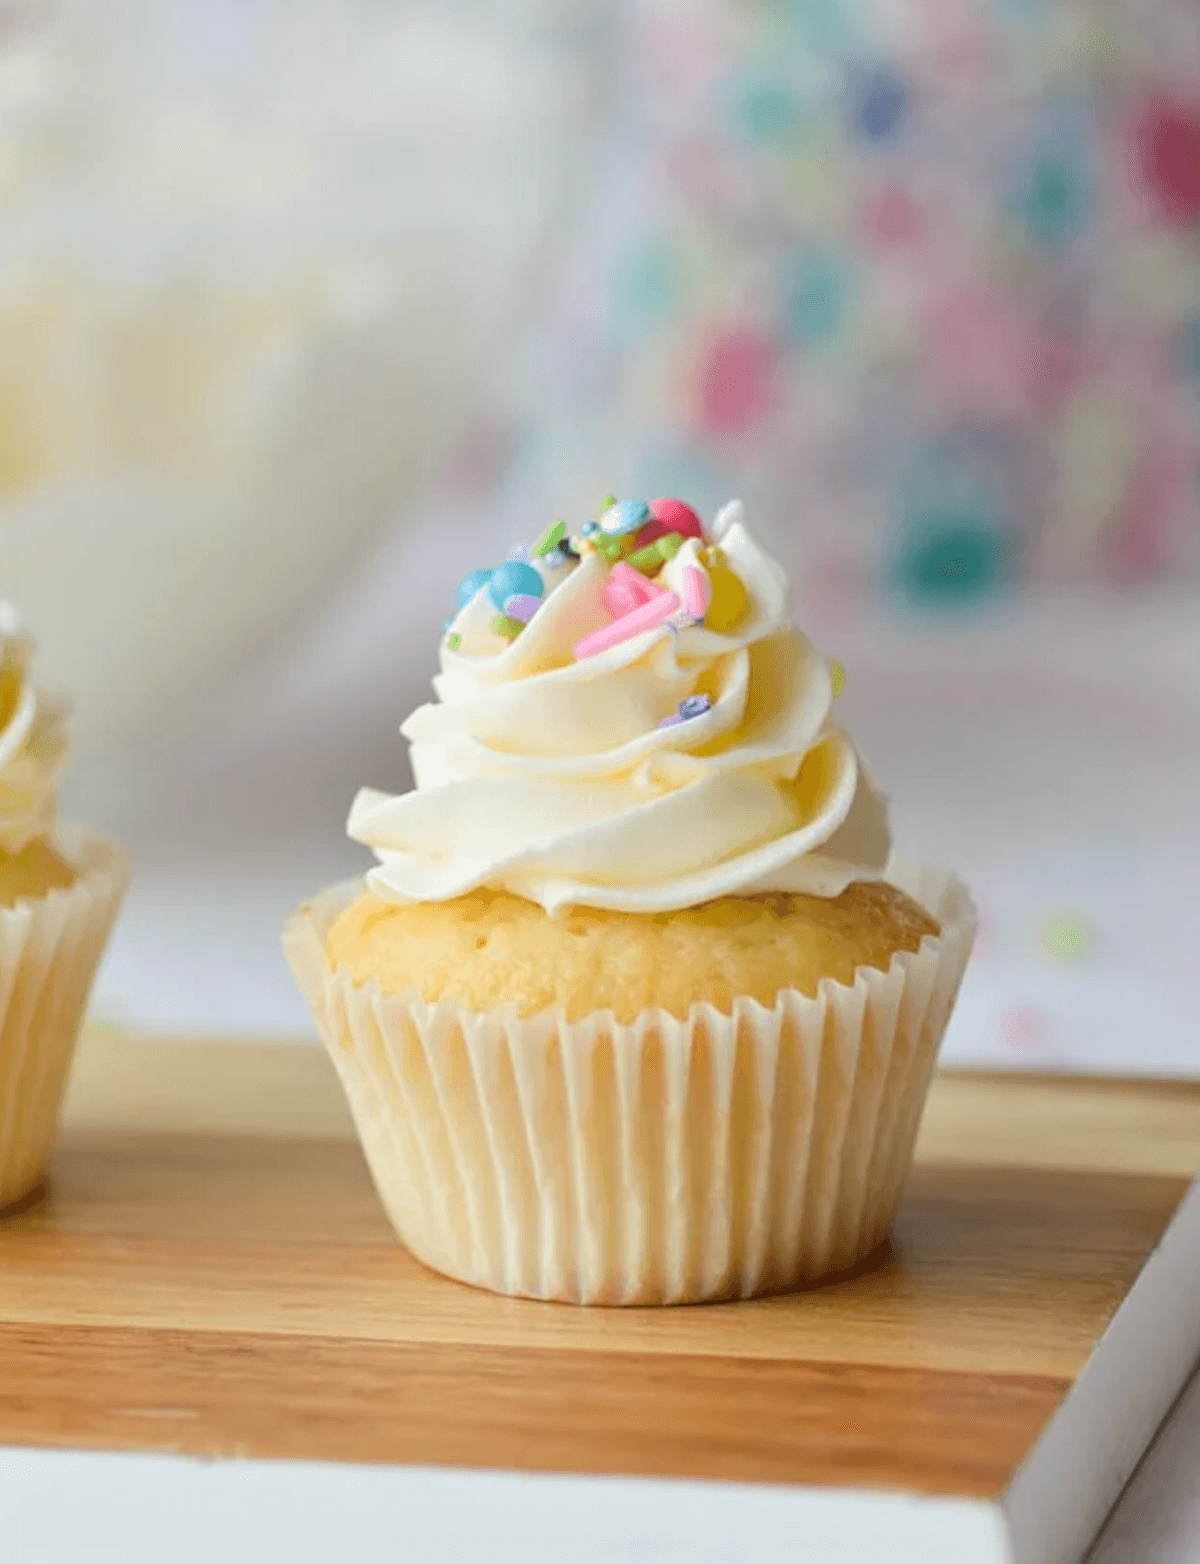 A cupcake topped with Swiss meringue buttercream made from leftover egg whites.